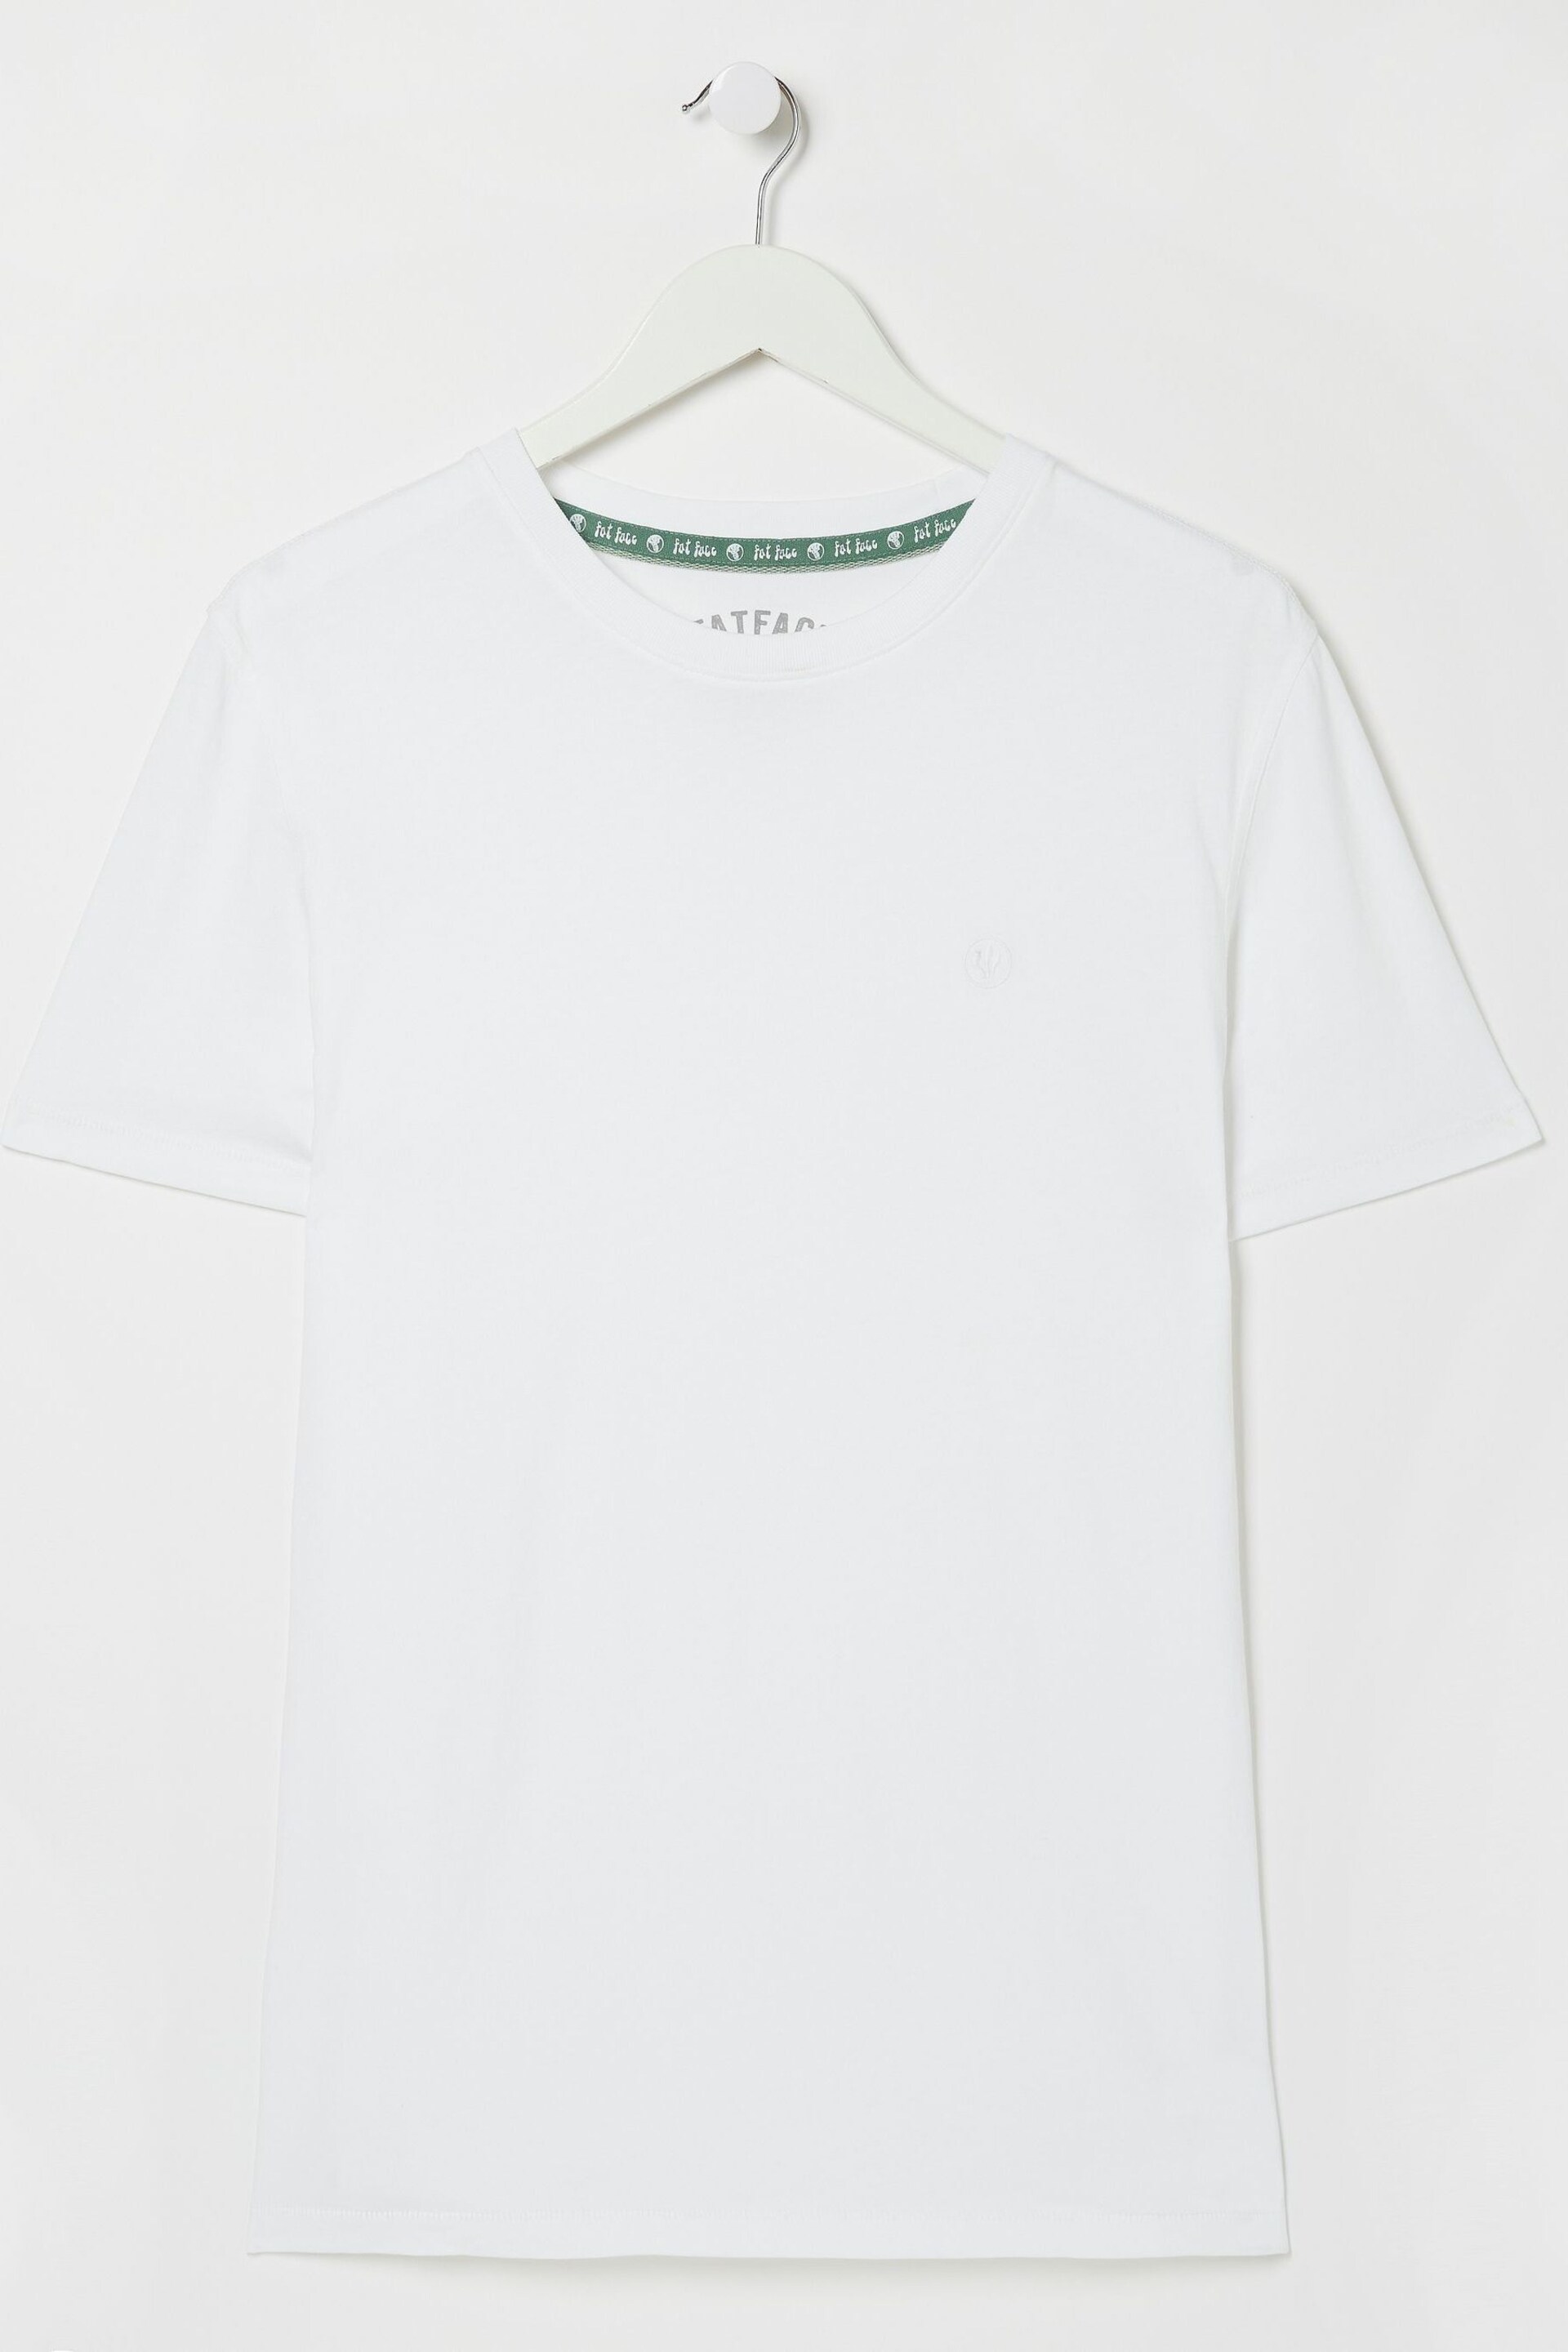 FatFace White Lulworth T-Shirt - Image 5 of 5